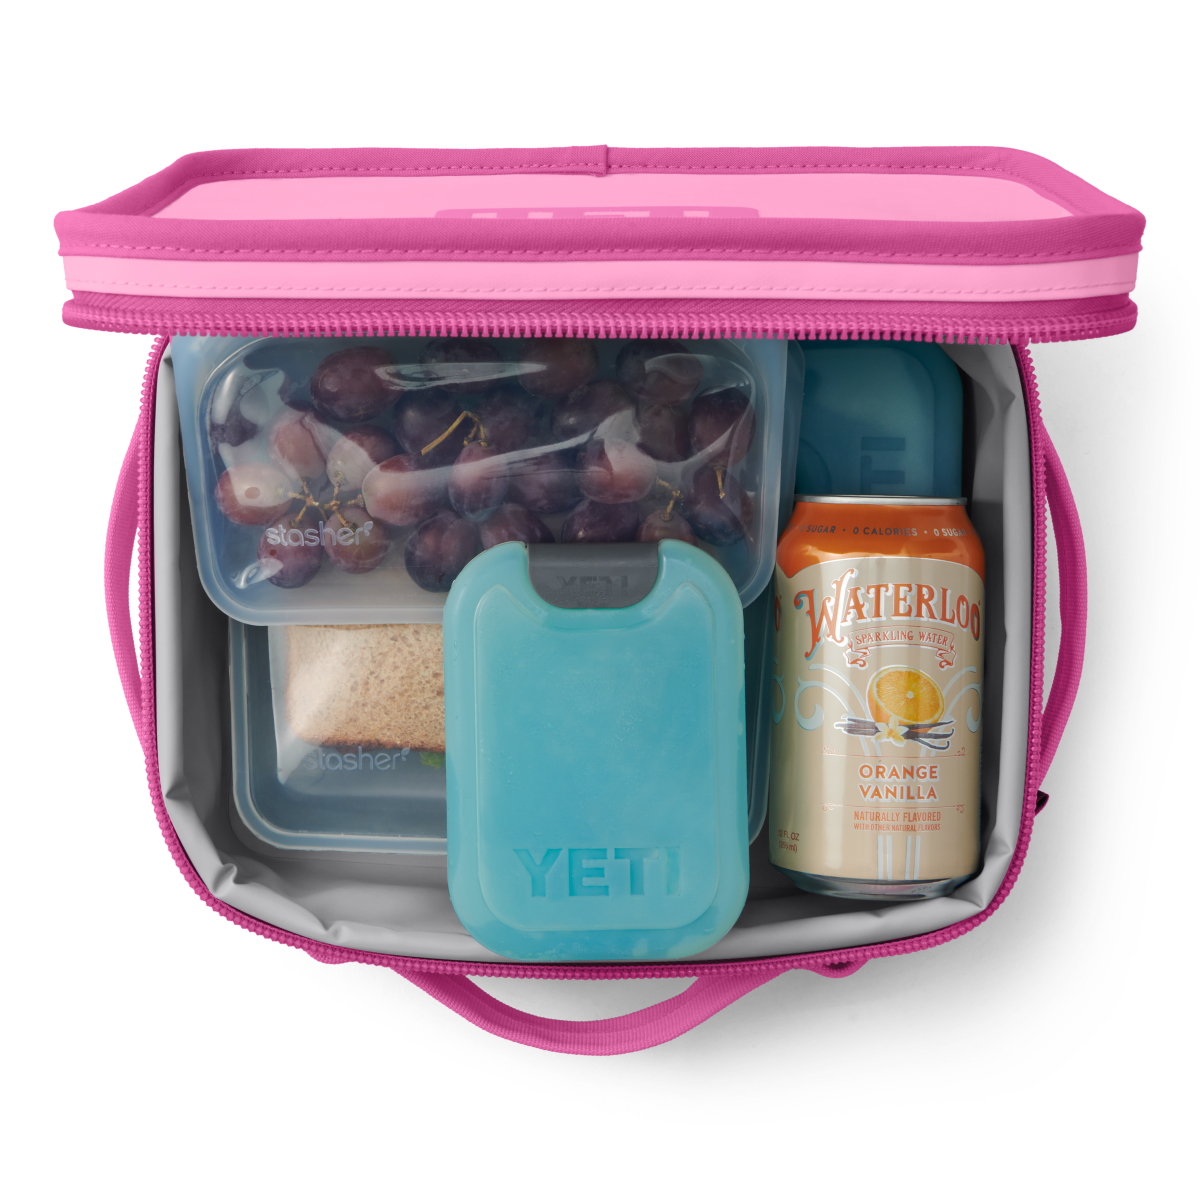 YETI Lunch Box Retired POWER PINK Lunch Box NWT's